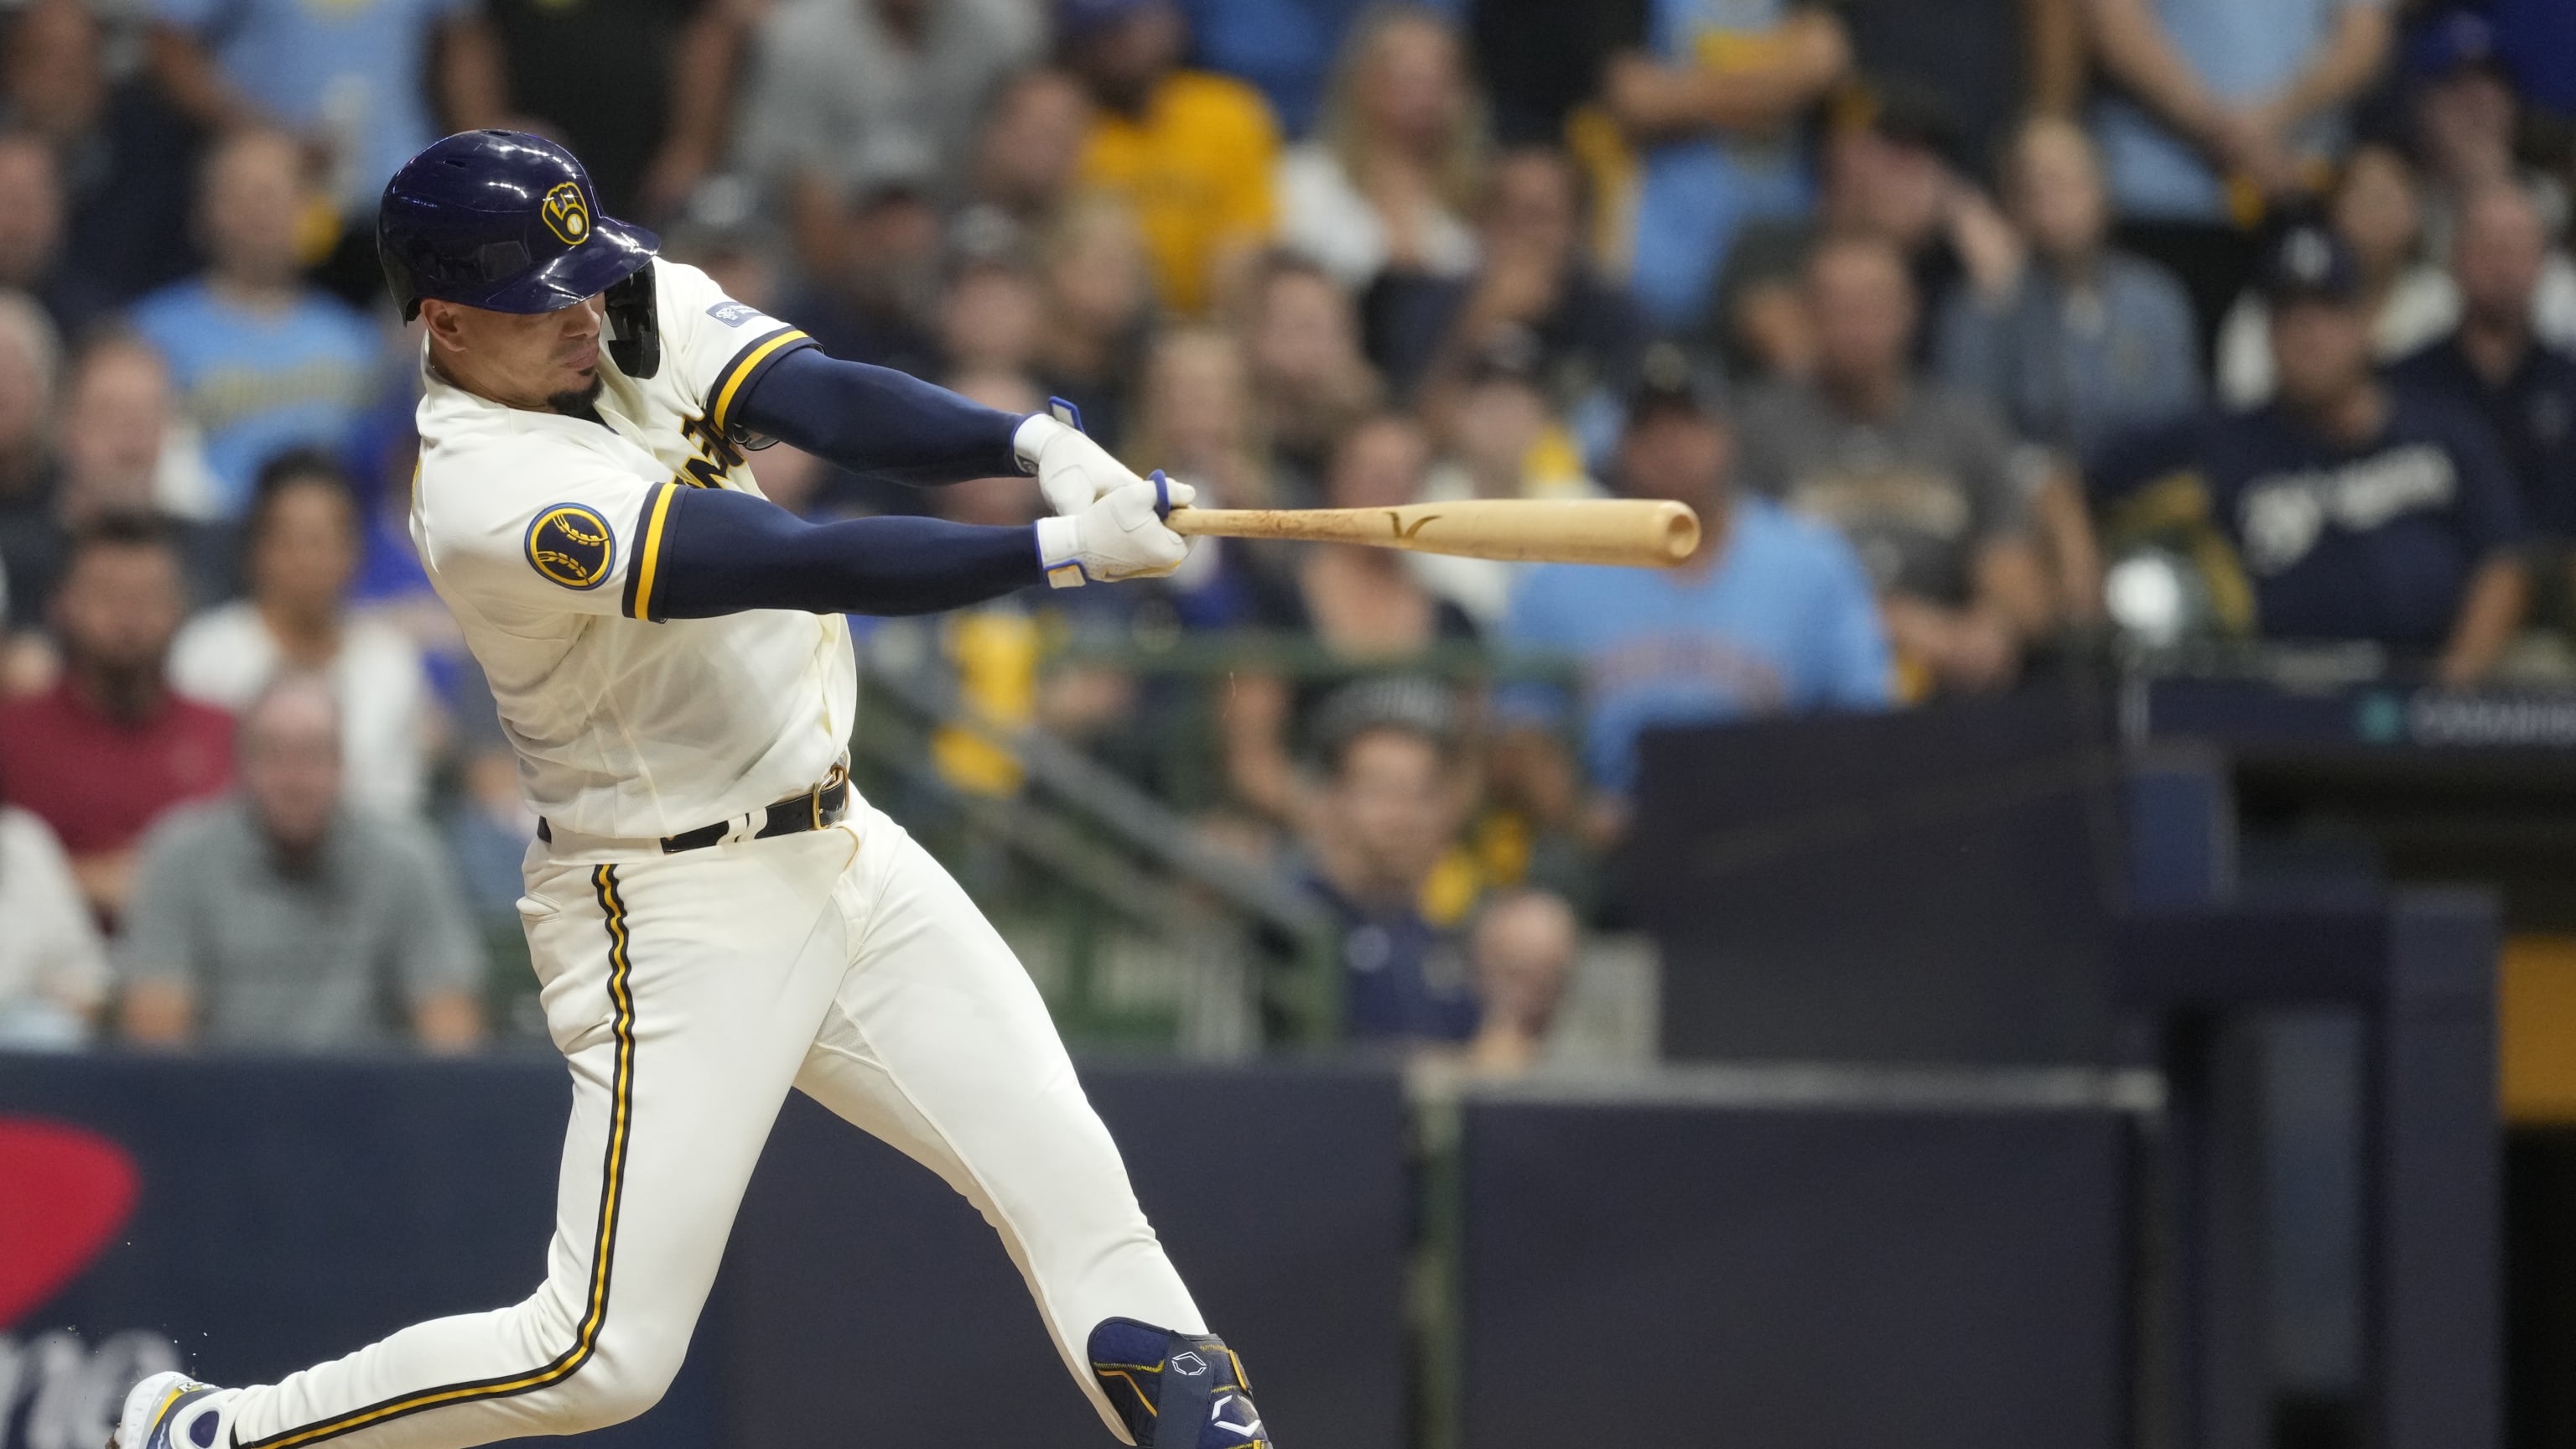 Why the Brewers should move Adames out of the two hole